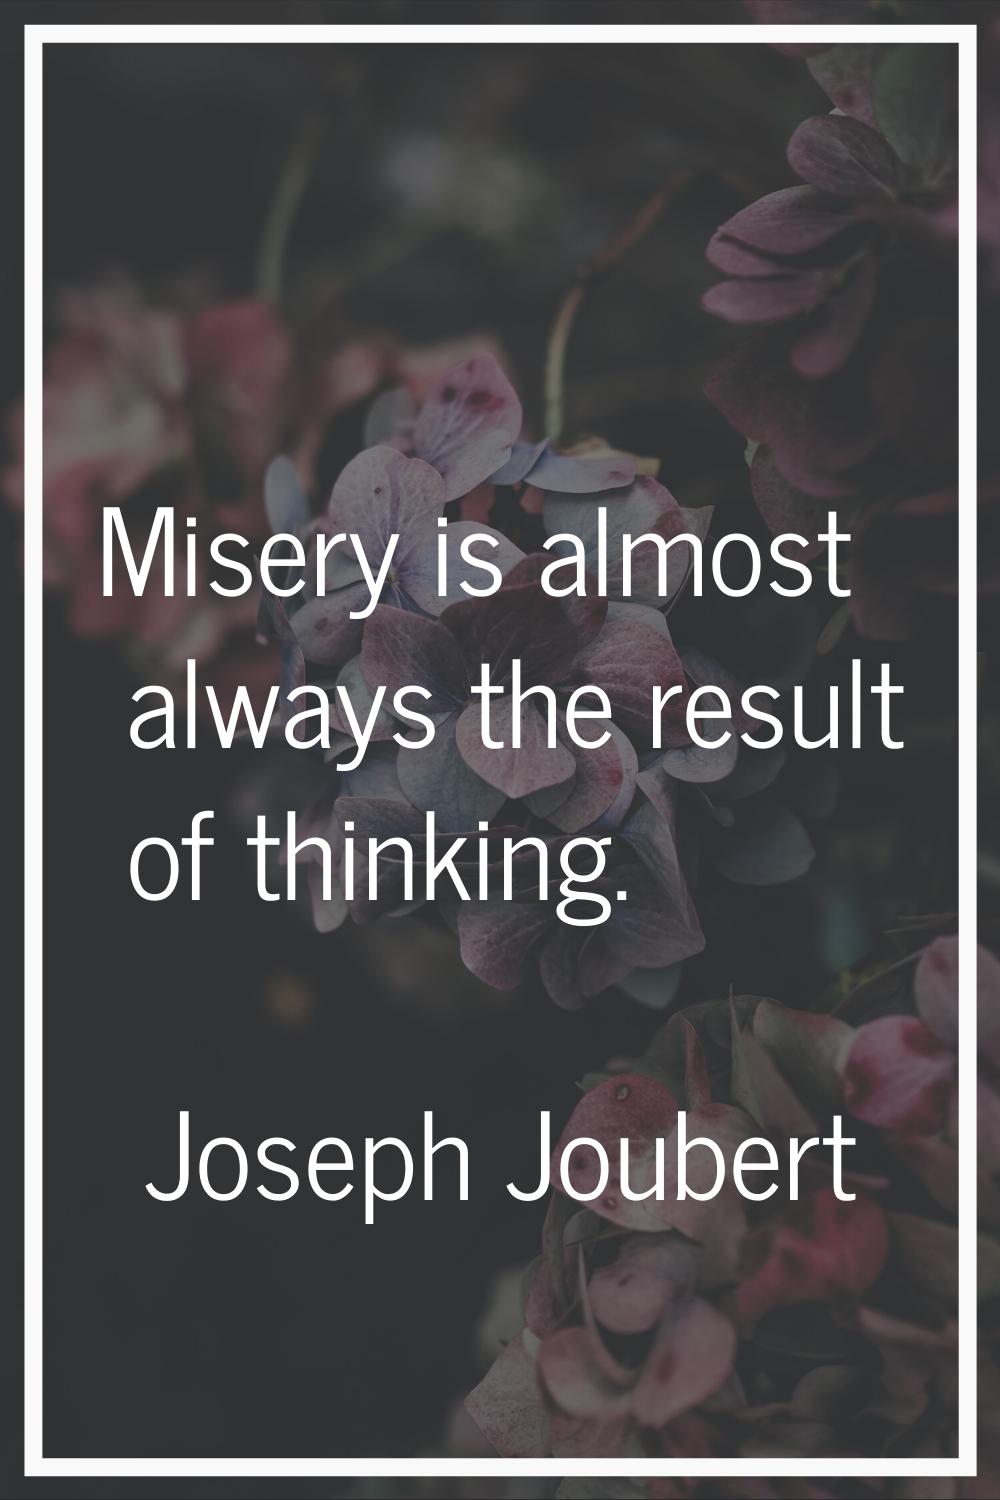 Misery is almost always the result of thinking.